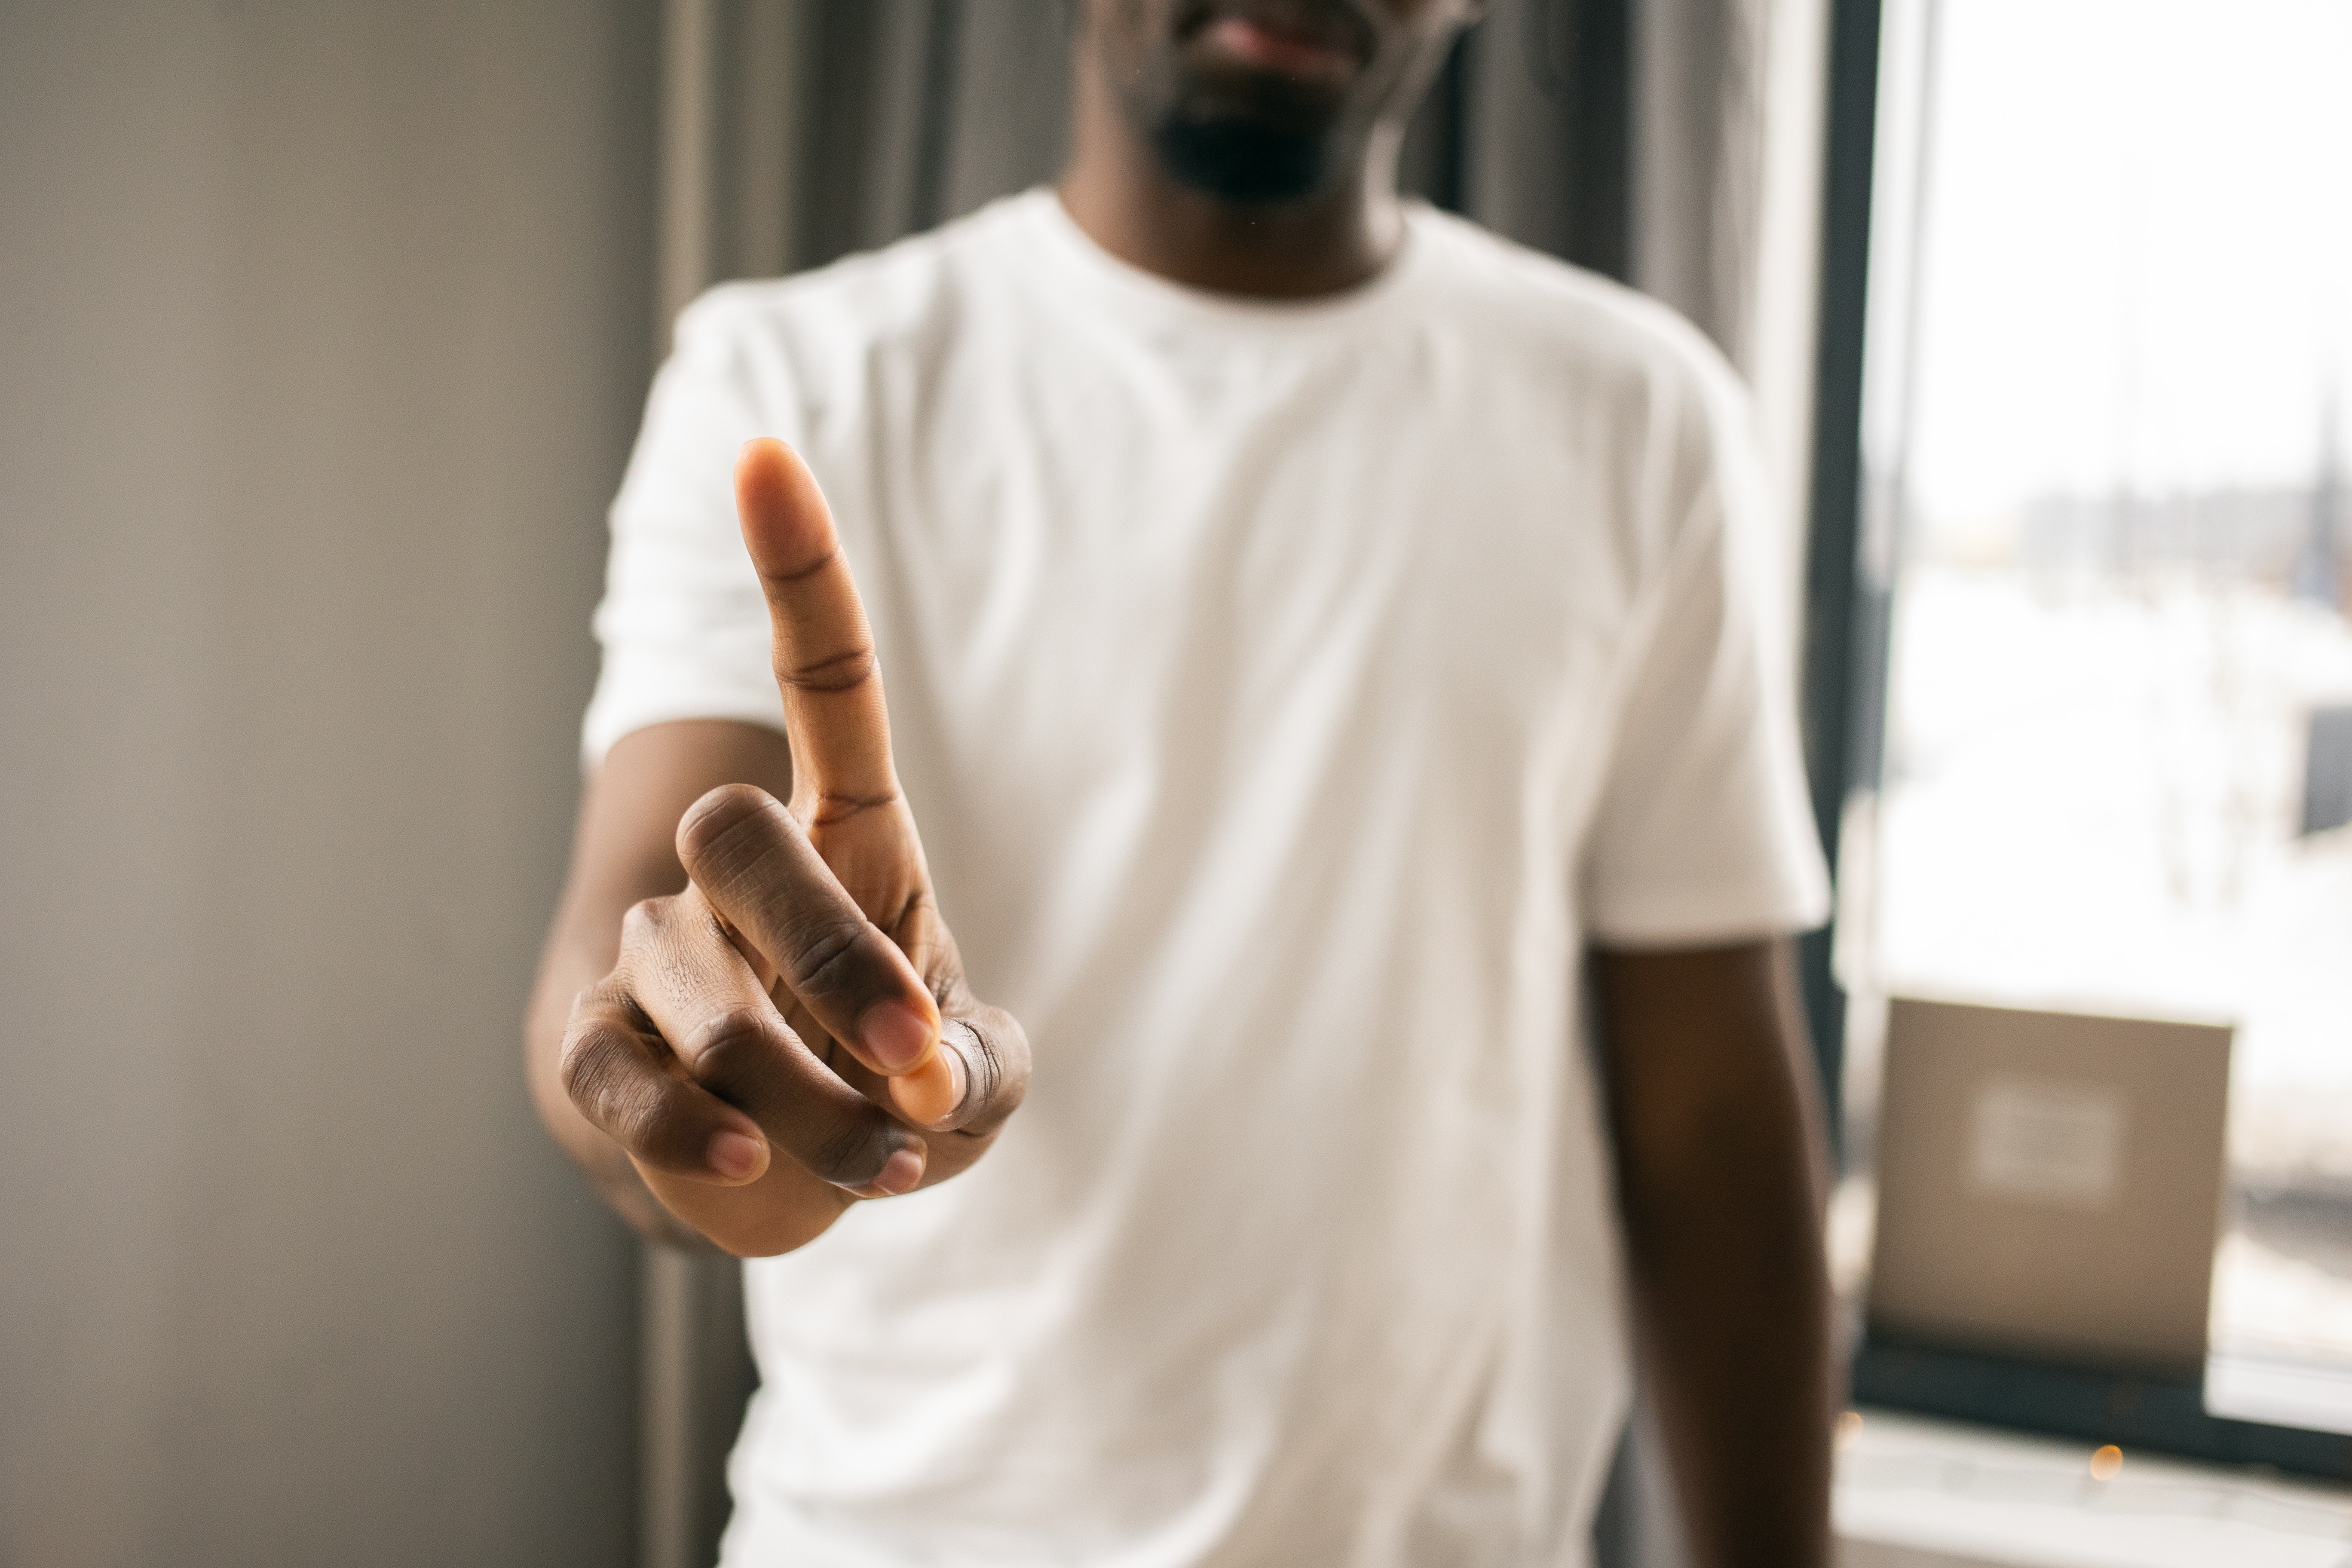 A black man shows the no sign with his index finger.